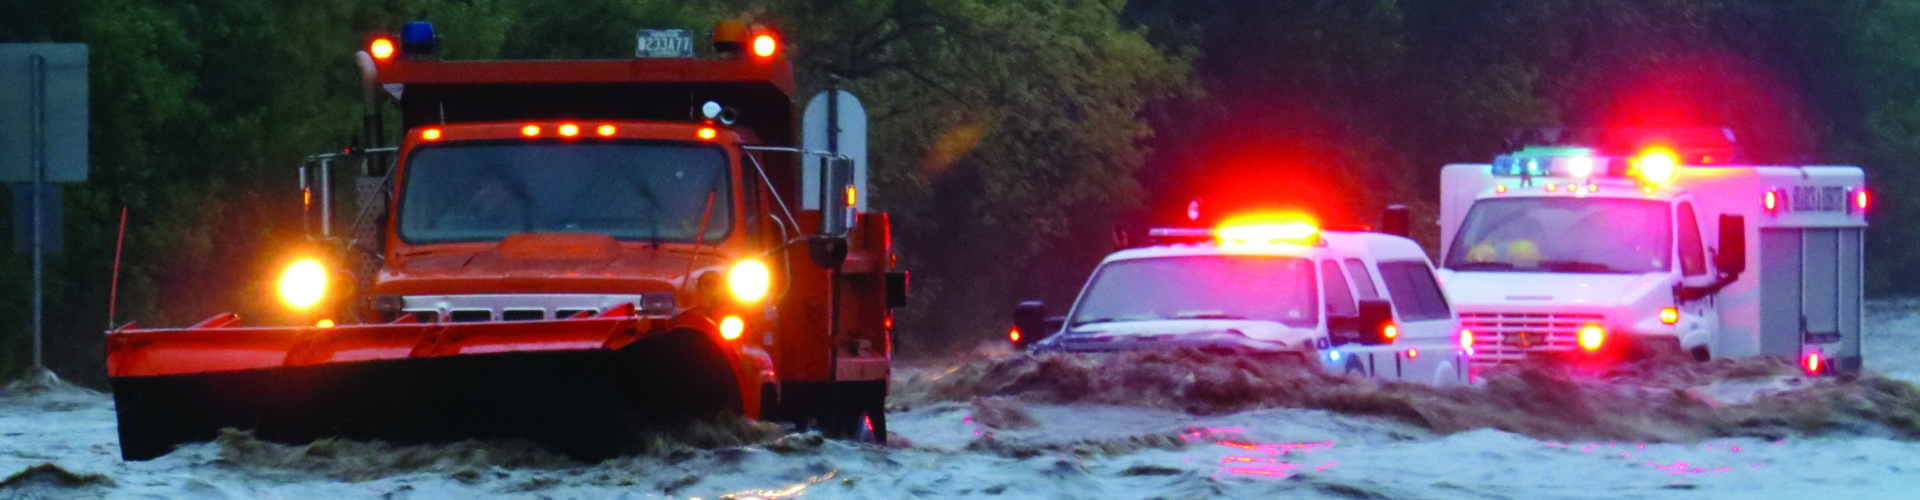 Emergency vehicles driving through floodwaters